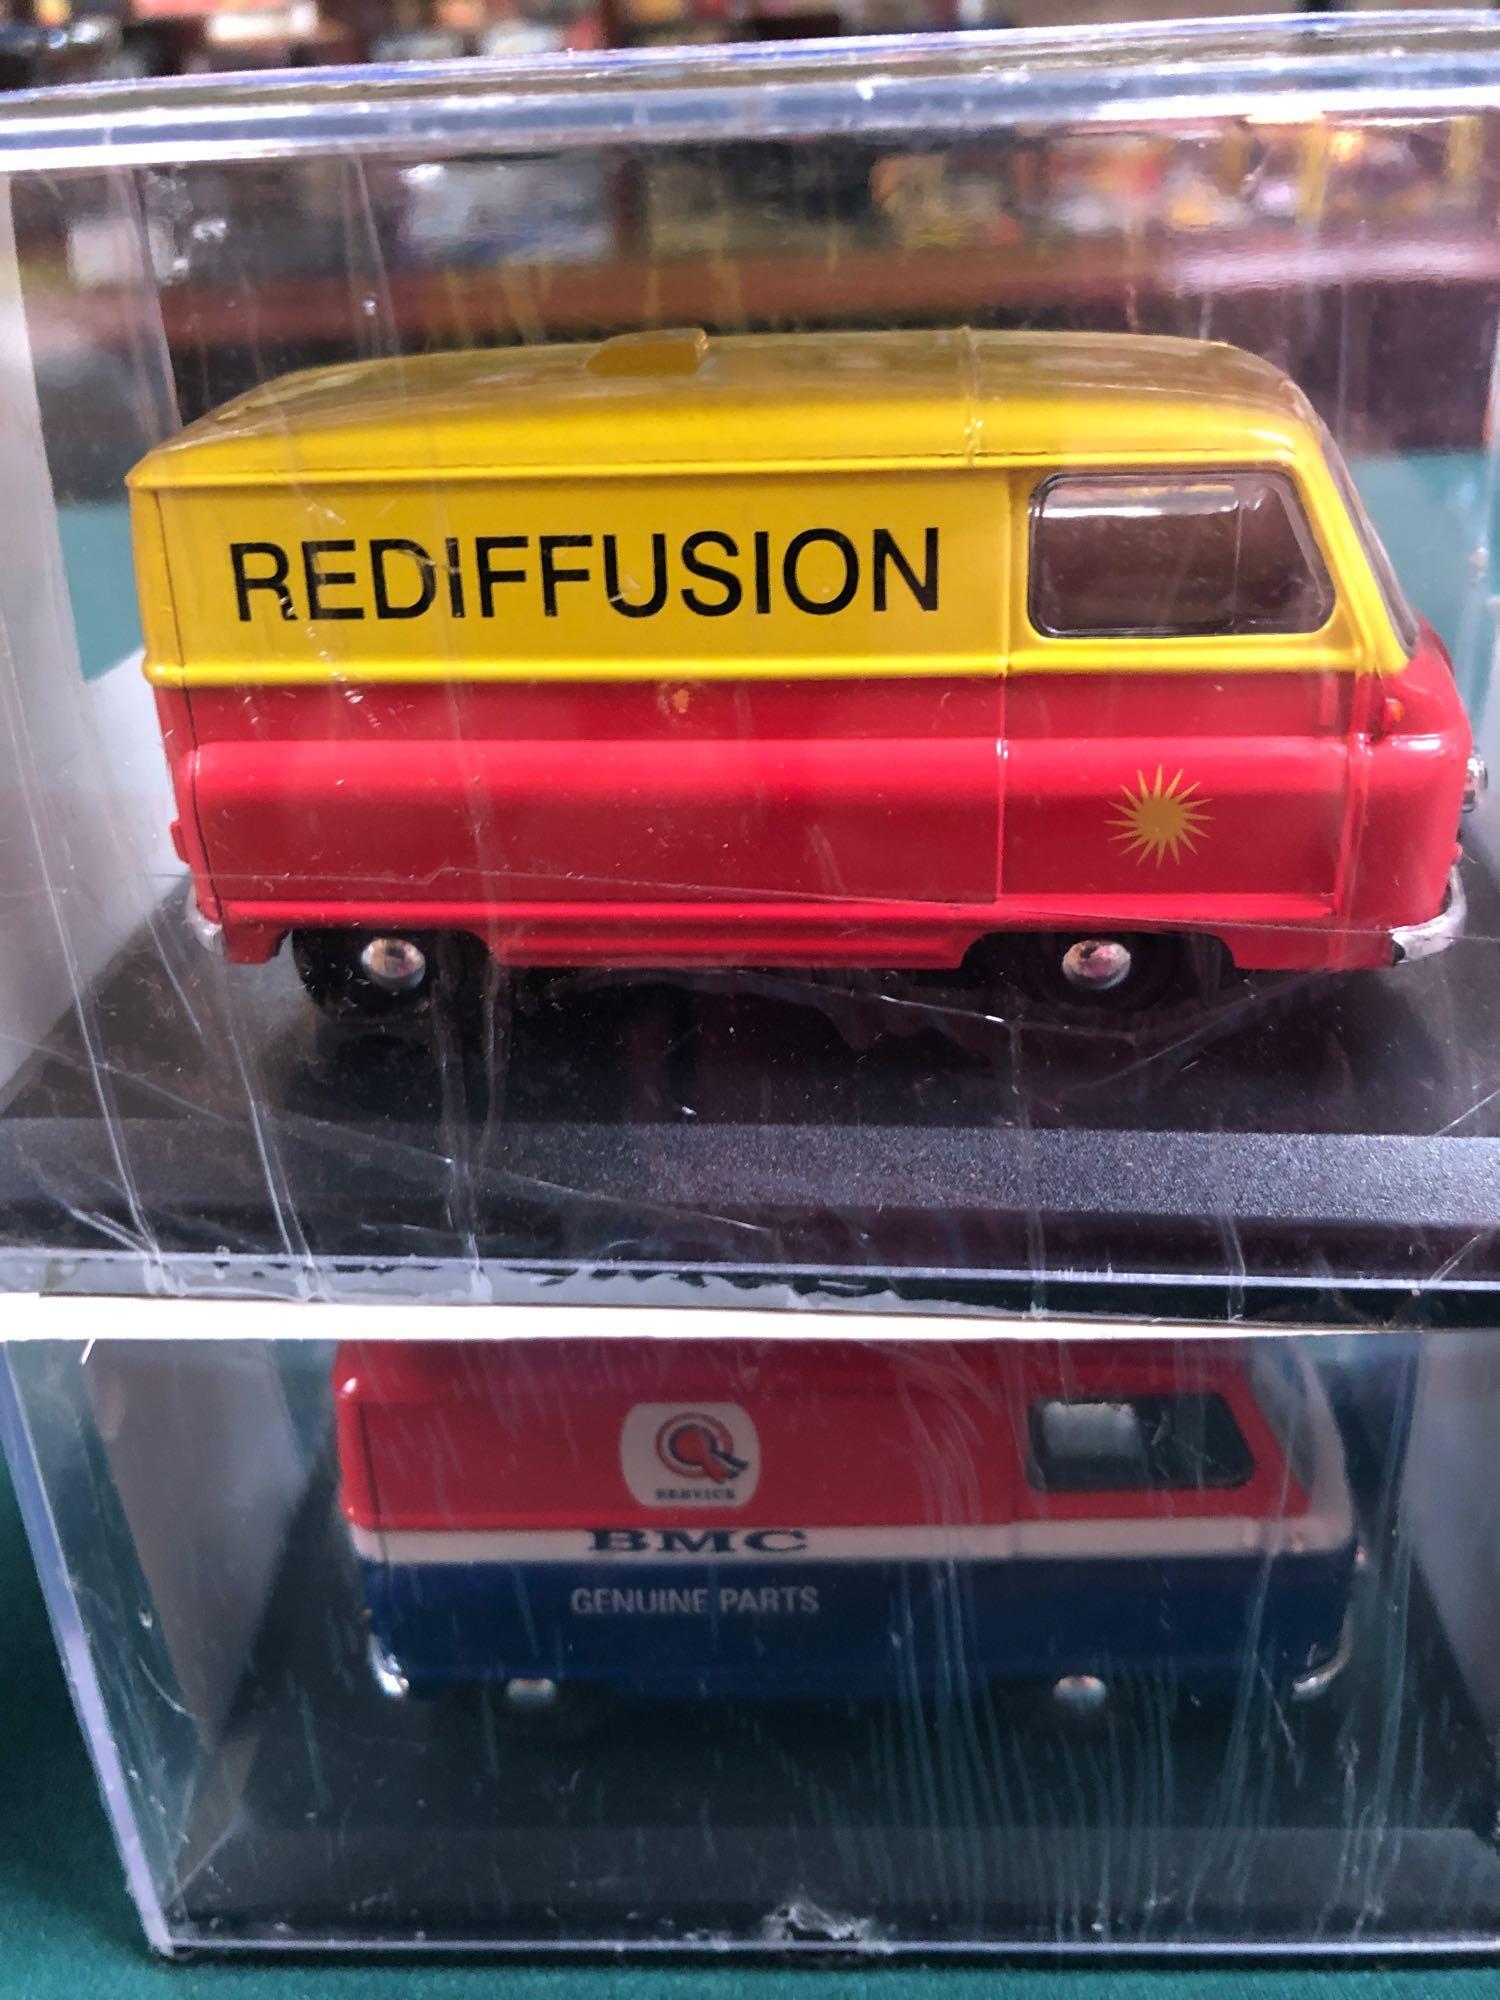 4x Oxford Diecast Models All On Display Boxes, Comprising Of; #JMA002 BMC Van Certificate 0287 Of - Image 2 of 3